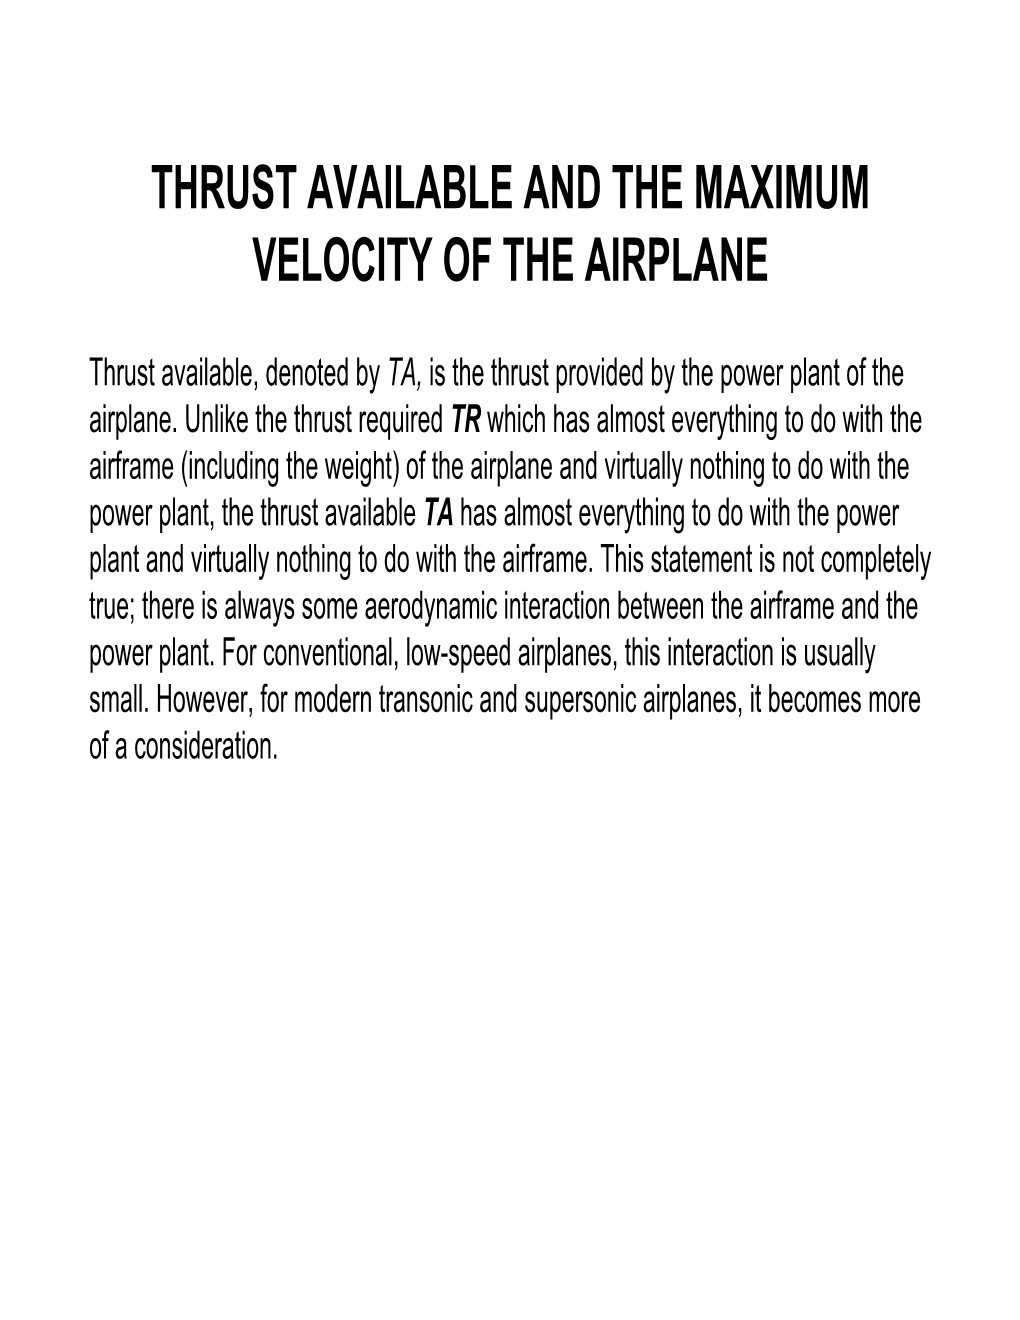 Thrust Available and the Maximum Velocity of the Airplane